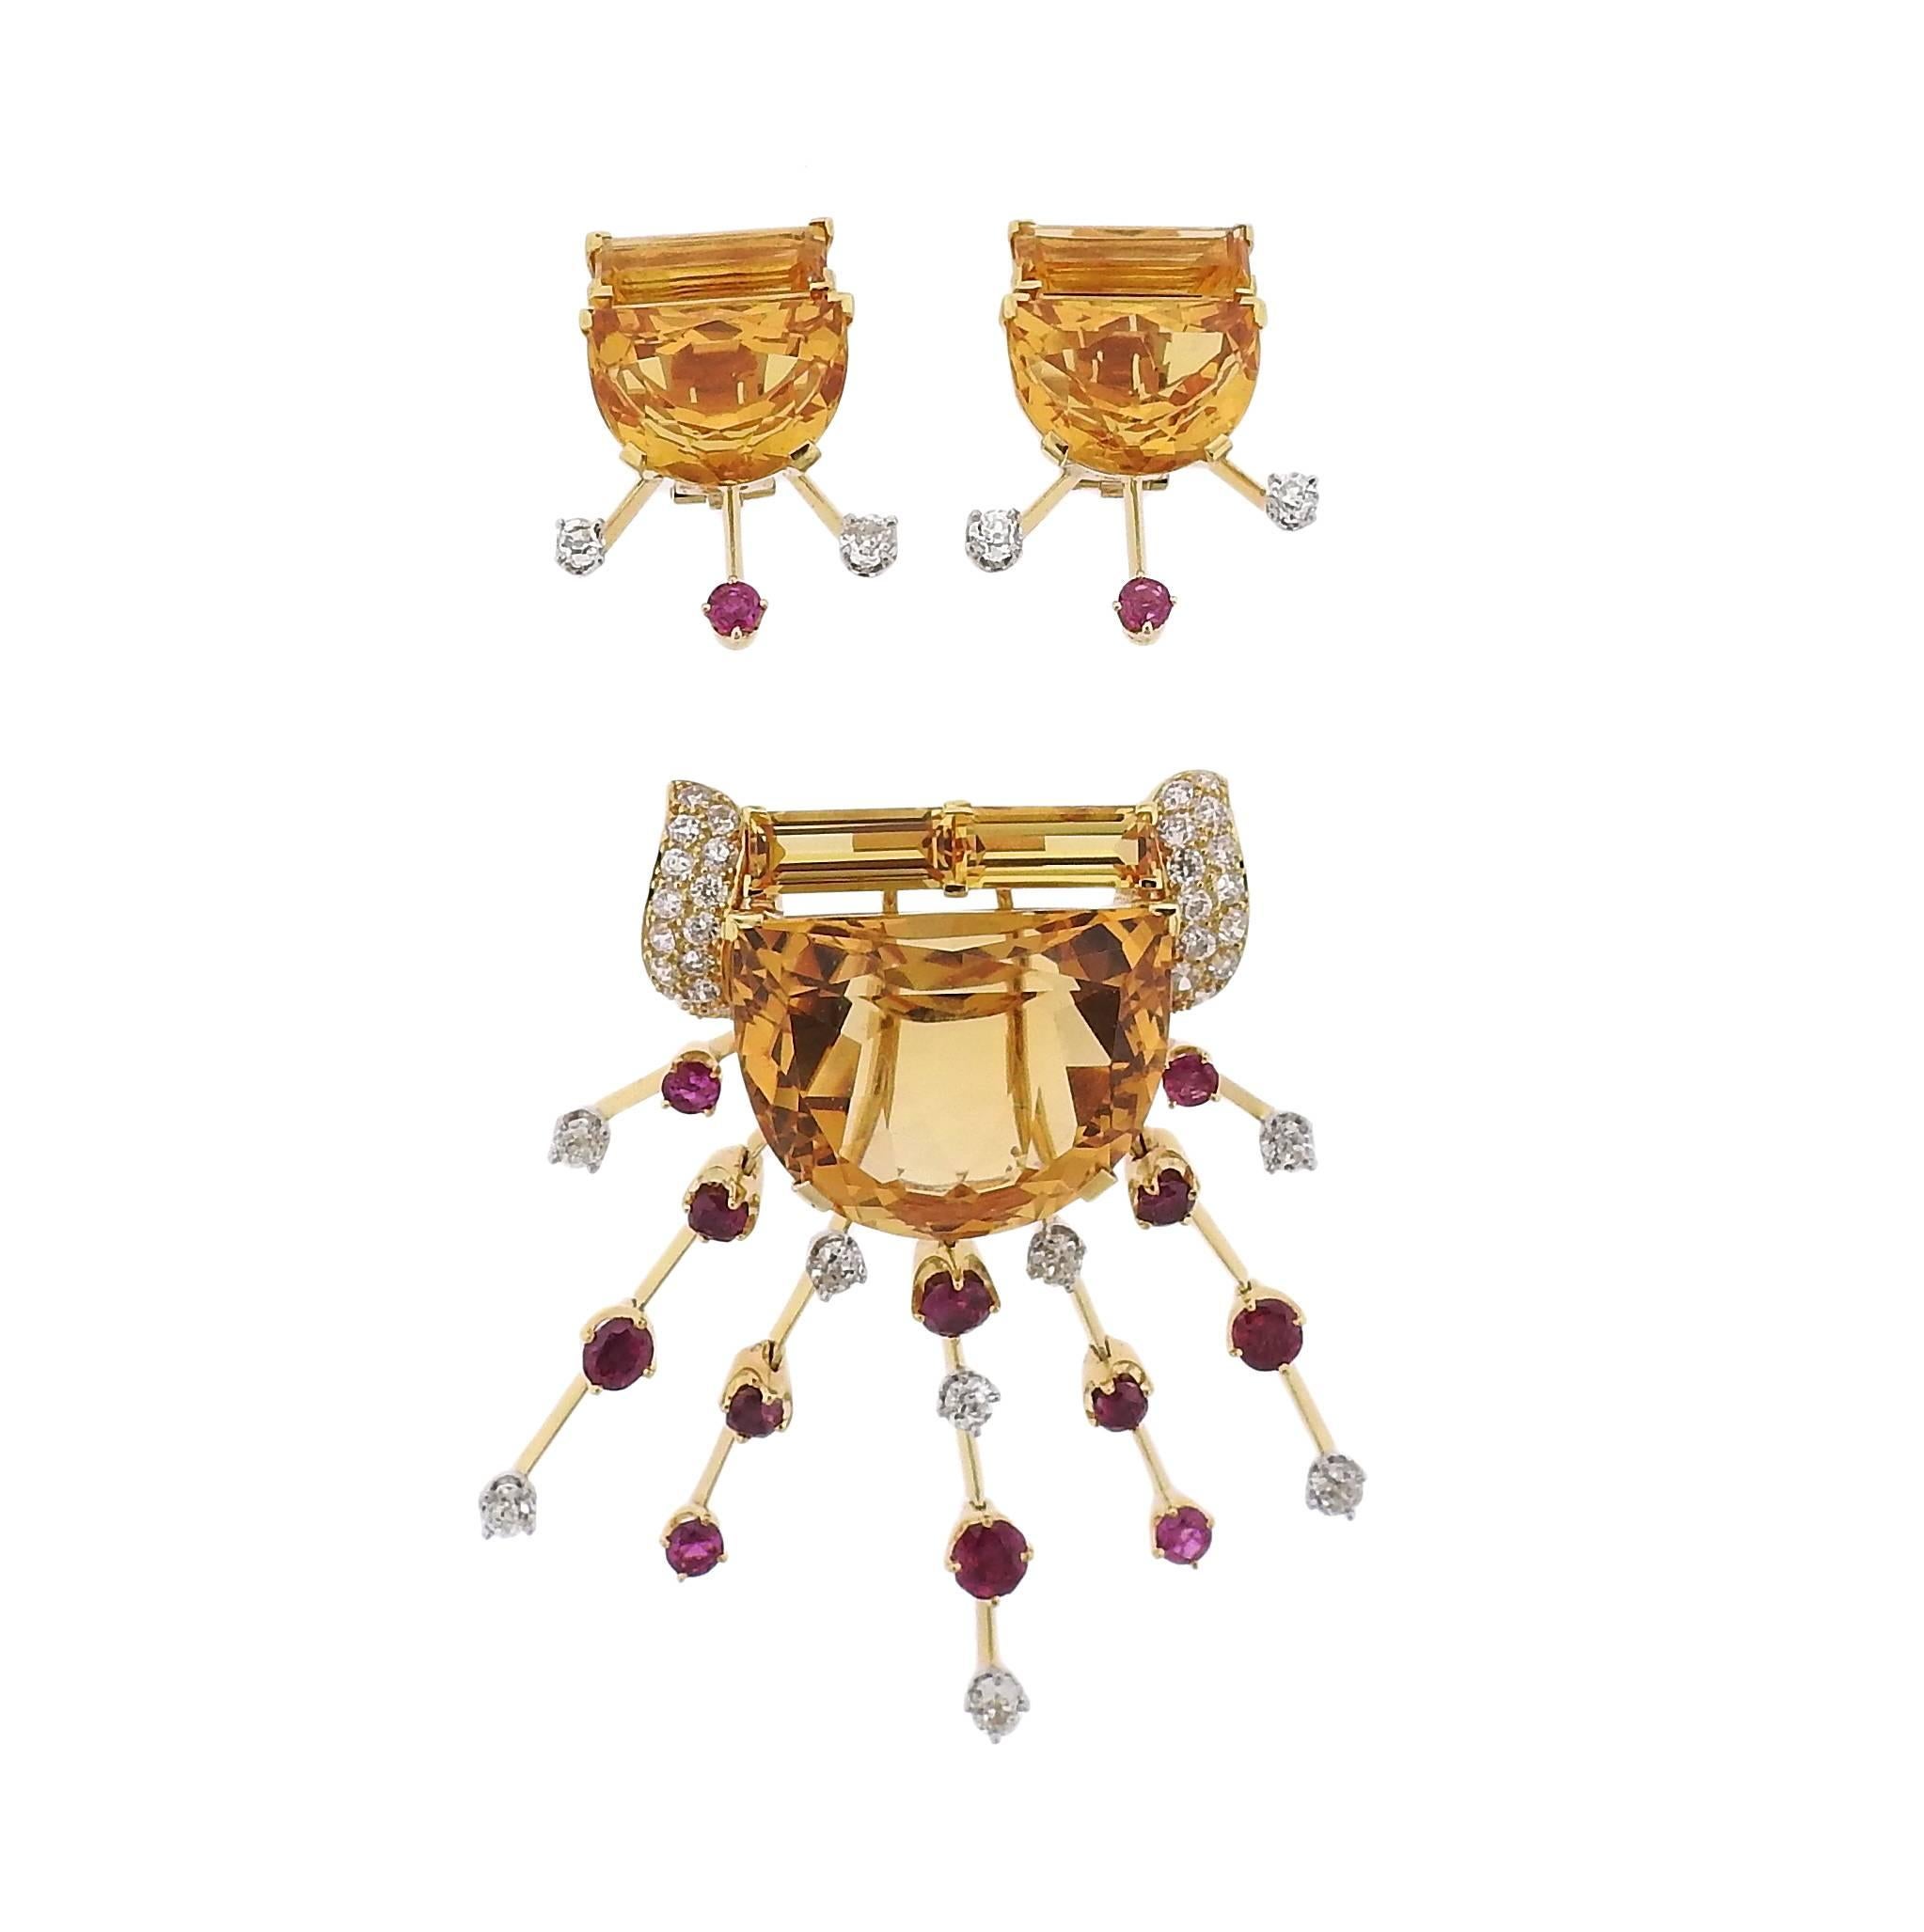 A suite of 18k gold retro earrings and brooch featuring ruby, citrine and approximately 3.00ctw of H/ VS-SI diamonds. Brooch (converts into a pendant) measures 63mm x 58mm, Earrings measure 28mm x 23mm. Weight is 67.1 grams,